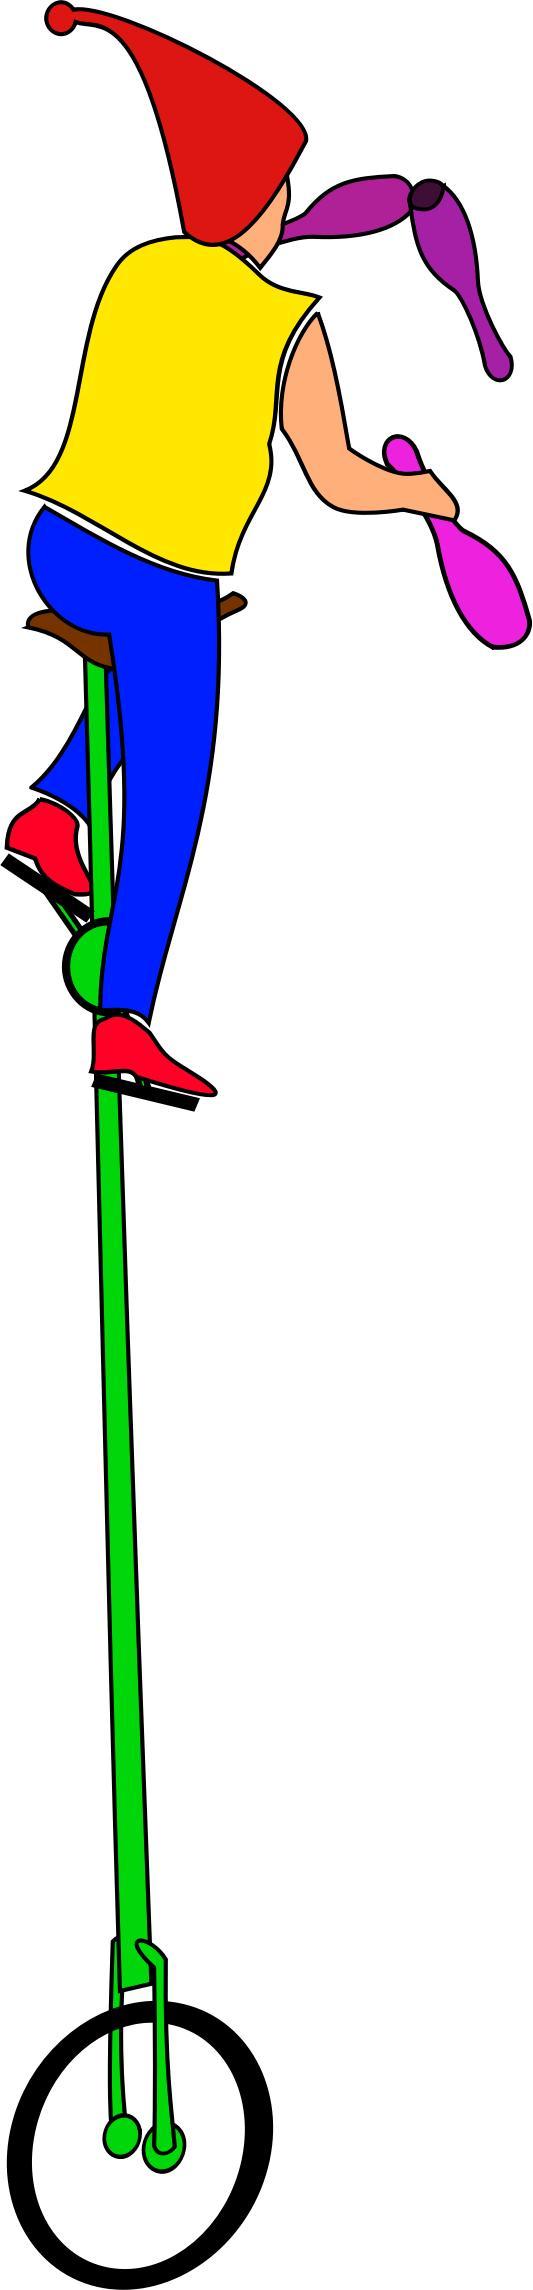 Simple Juggler on Unicycle png transparent